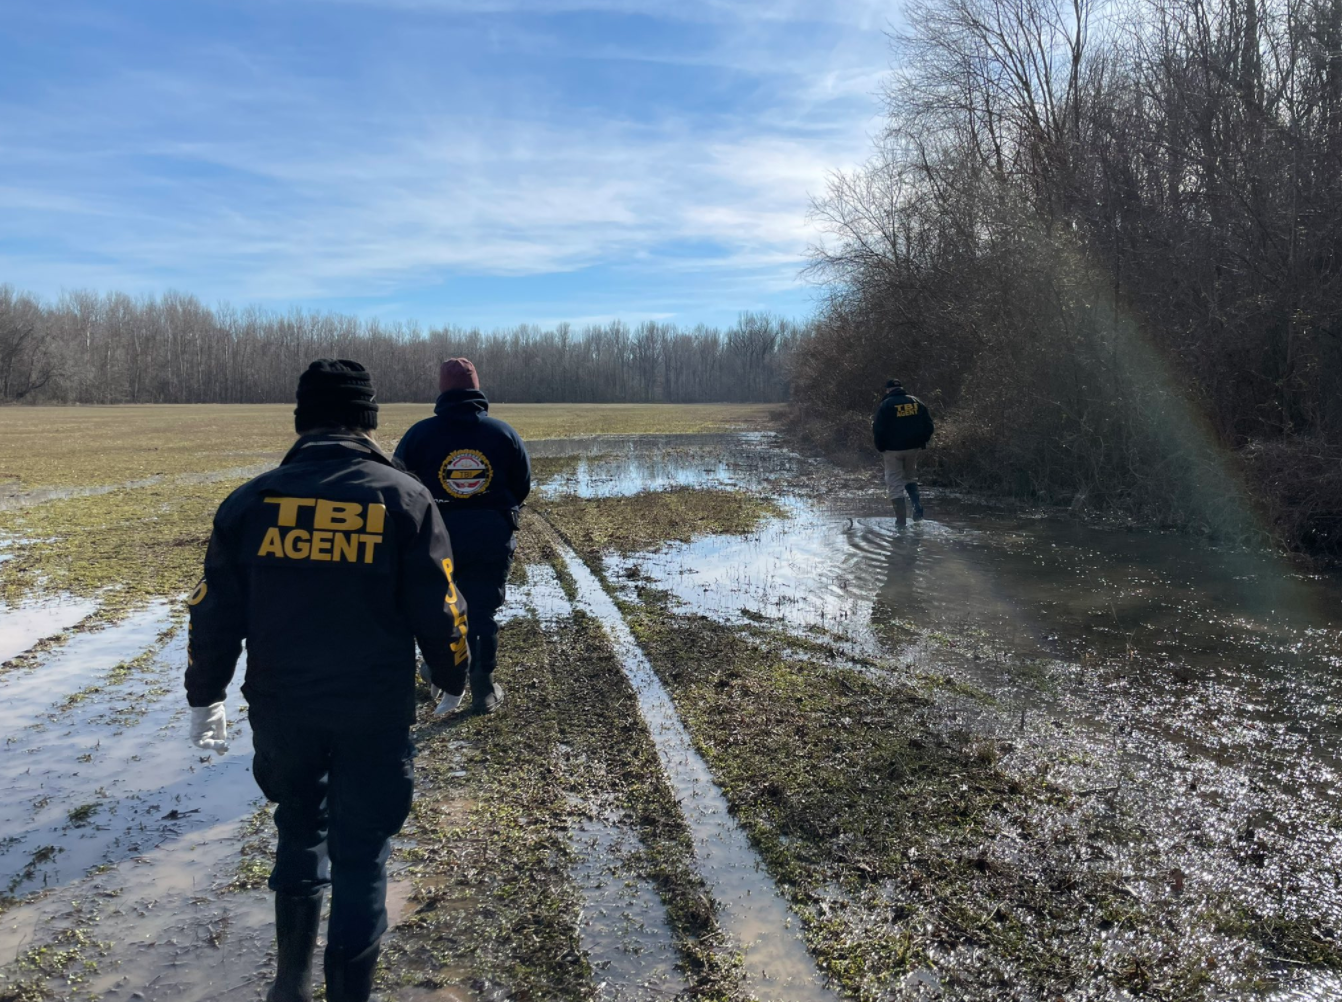 Three men in navy TBI Agent uniforms search a muddy wet field for David Vowell.